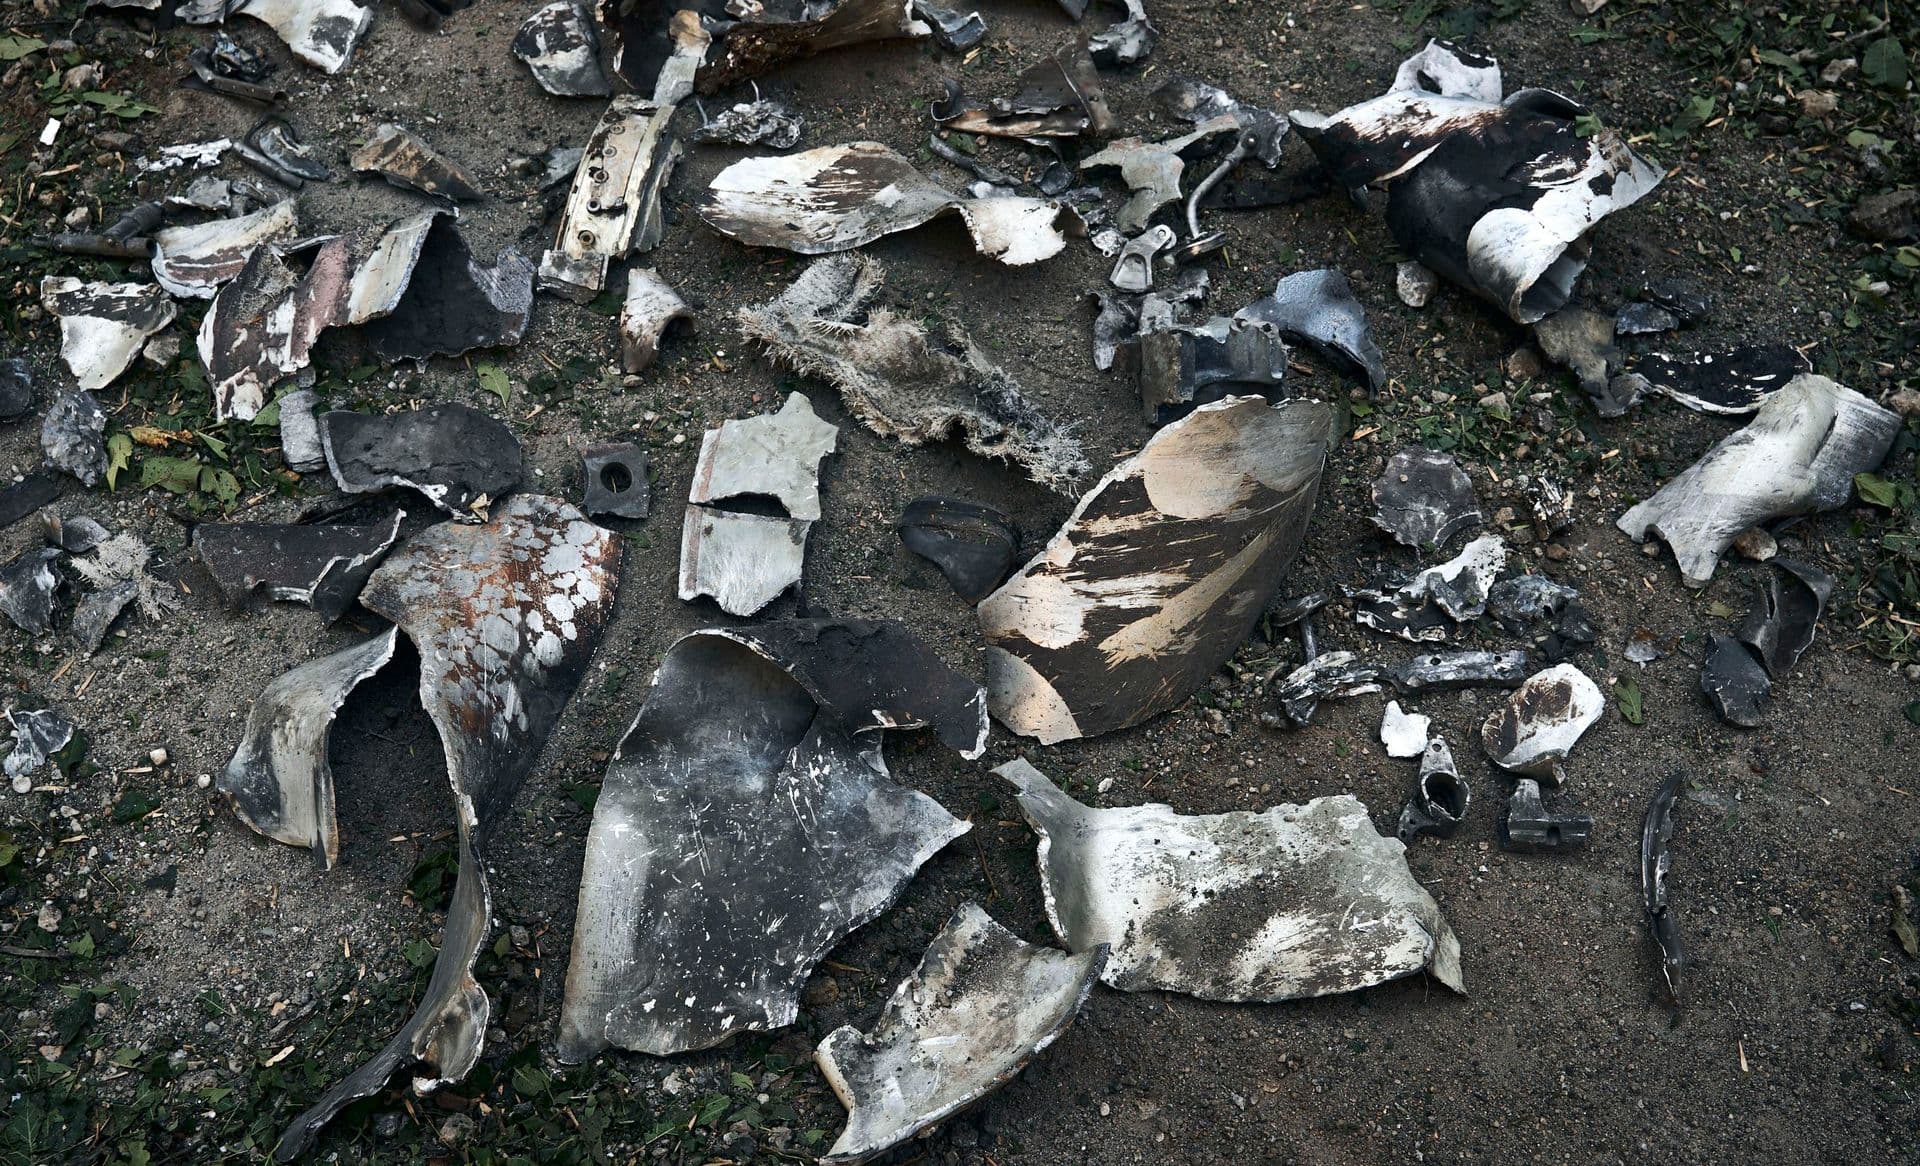 Fragments of ammunition placed on the ground by Ukrainian police investigators after a rocket attack in Kramatorsk